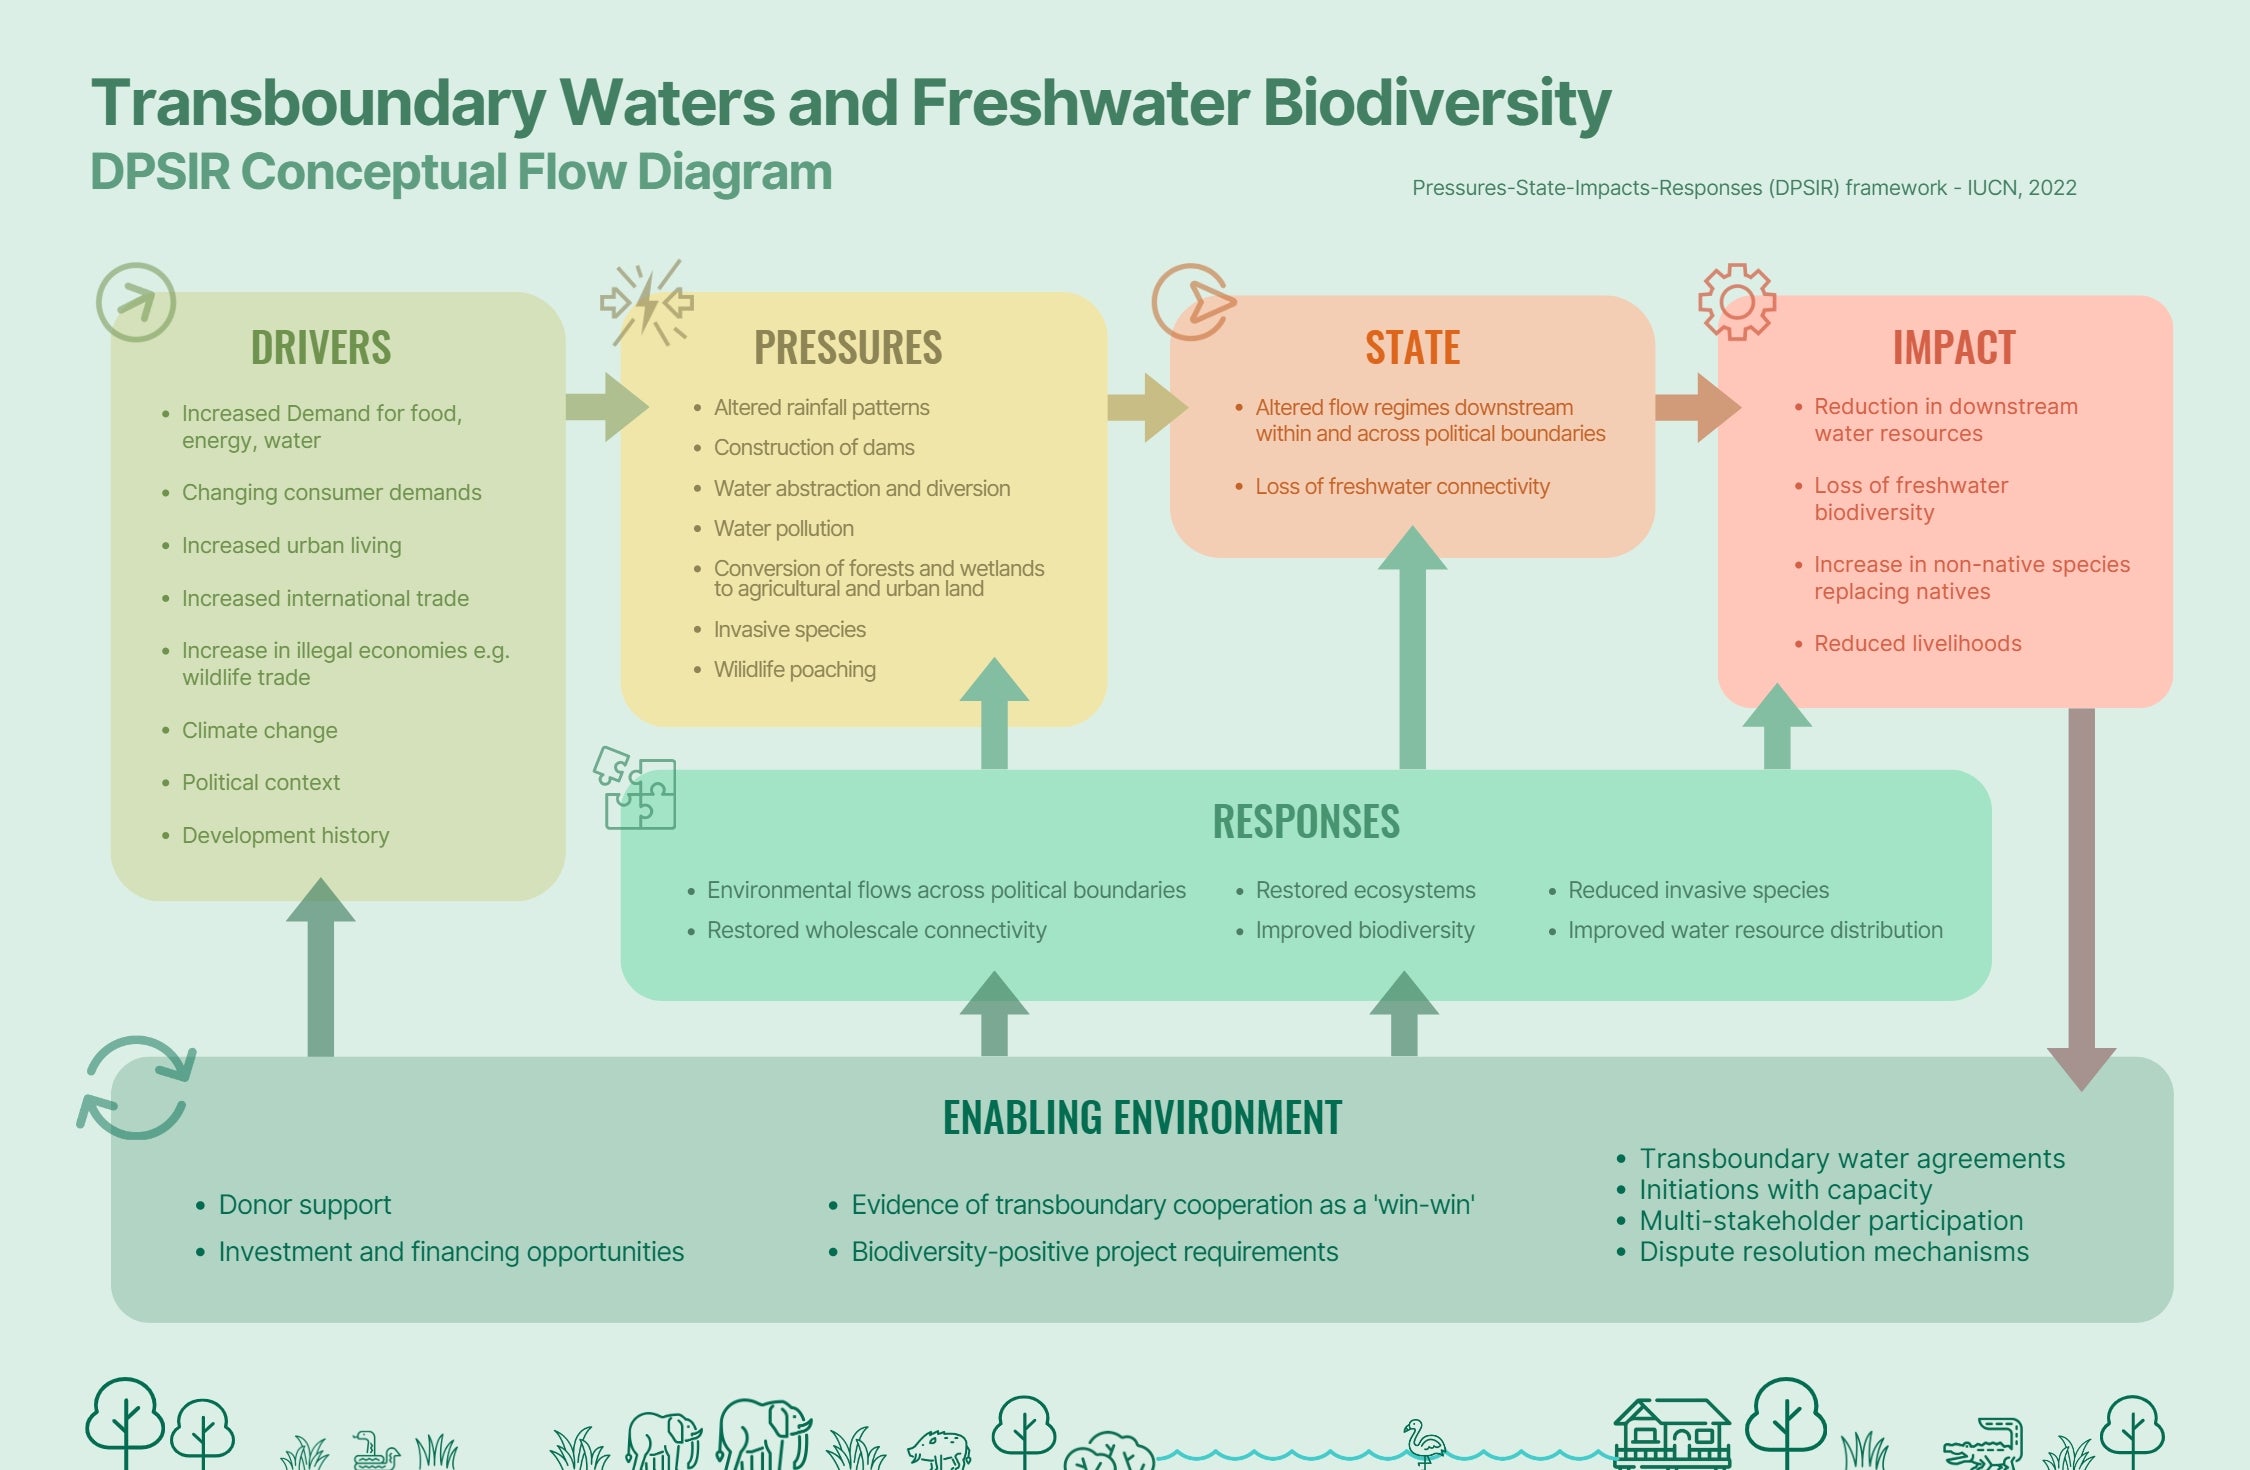 Transboundary Waters and Freshwater Biodiversity. Source: The International Union for Conservation of Nature (IUCN), 2022